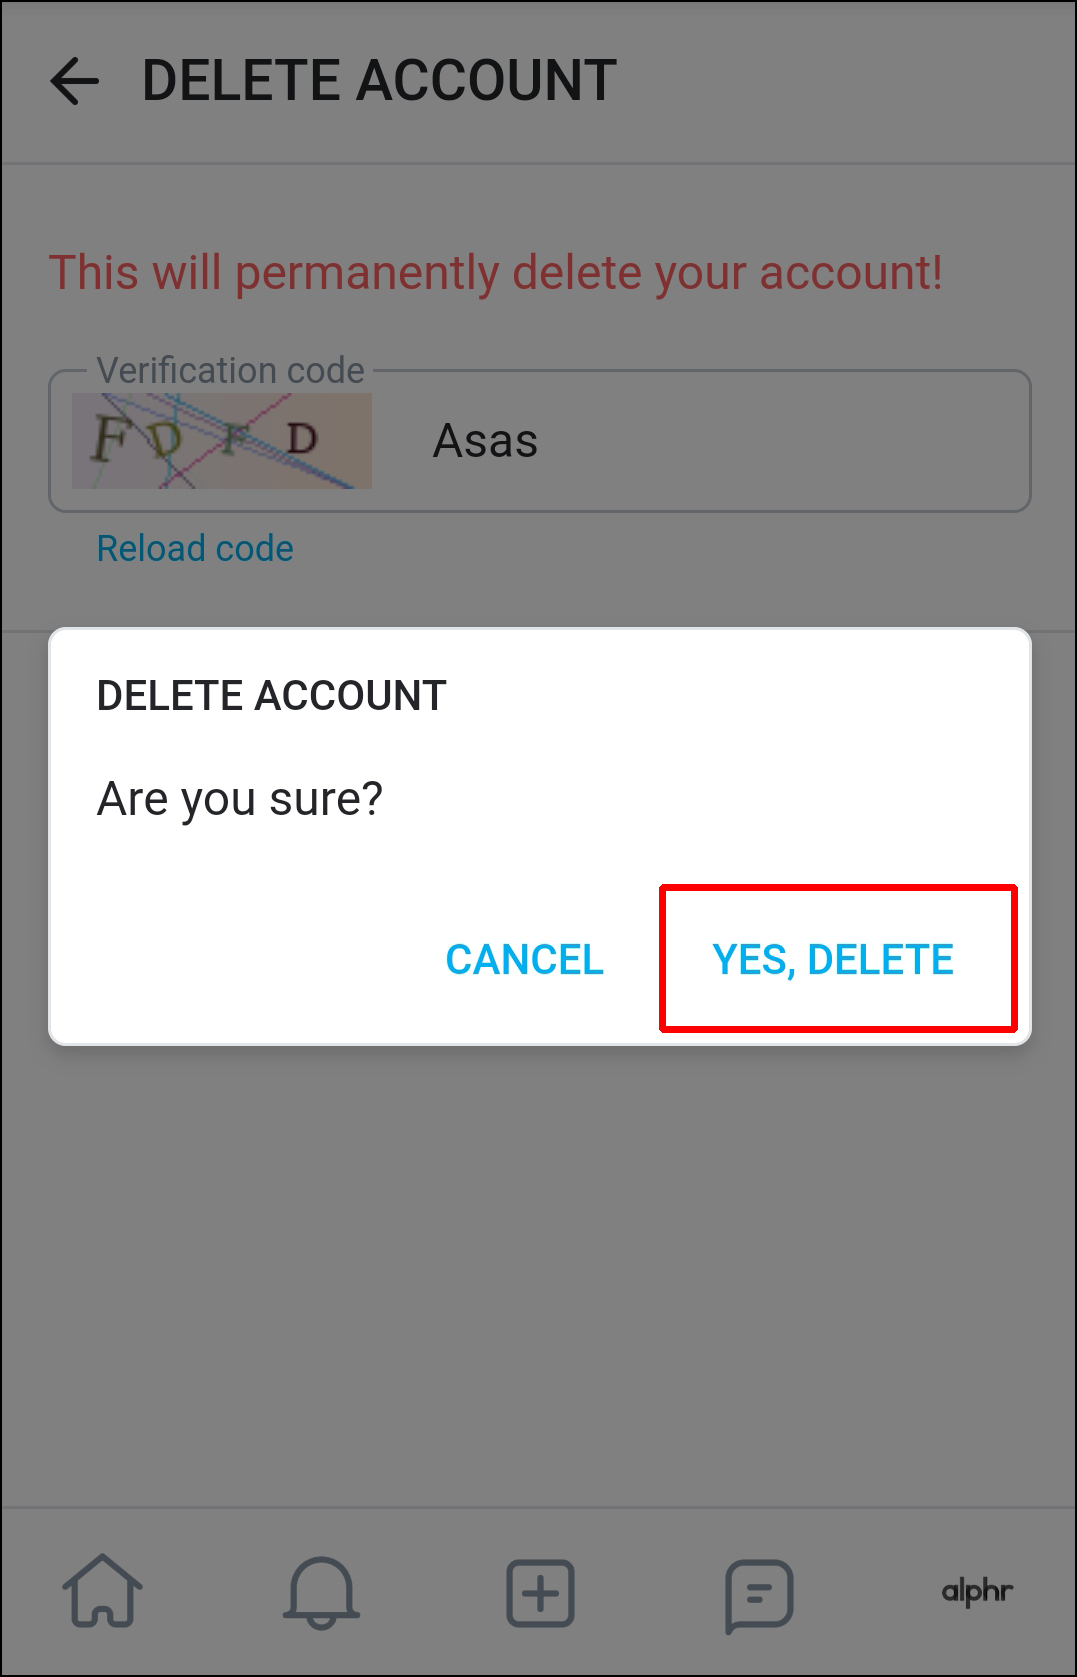 How to delete my onlyfans account